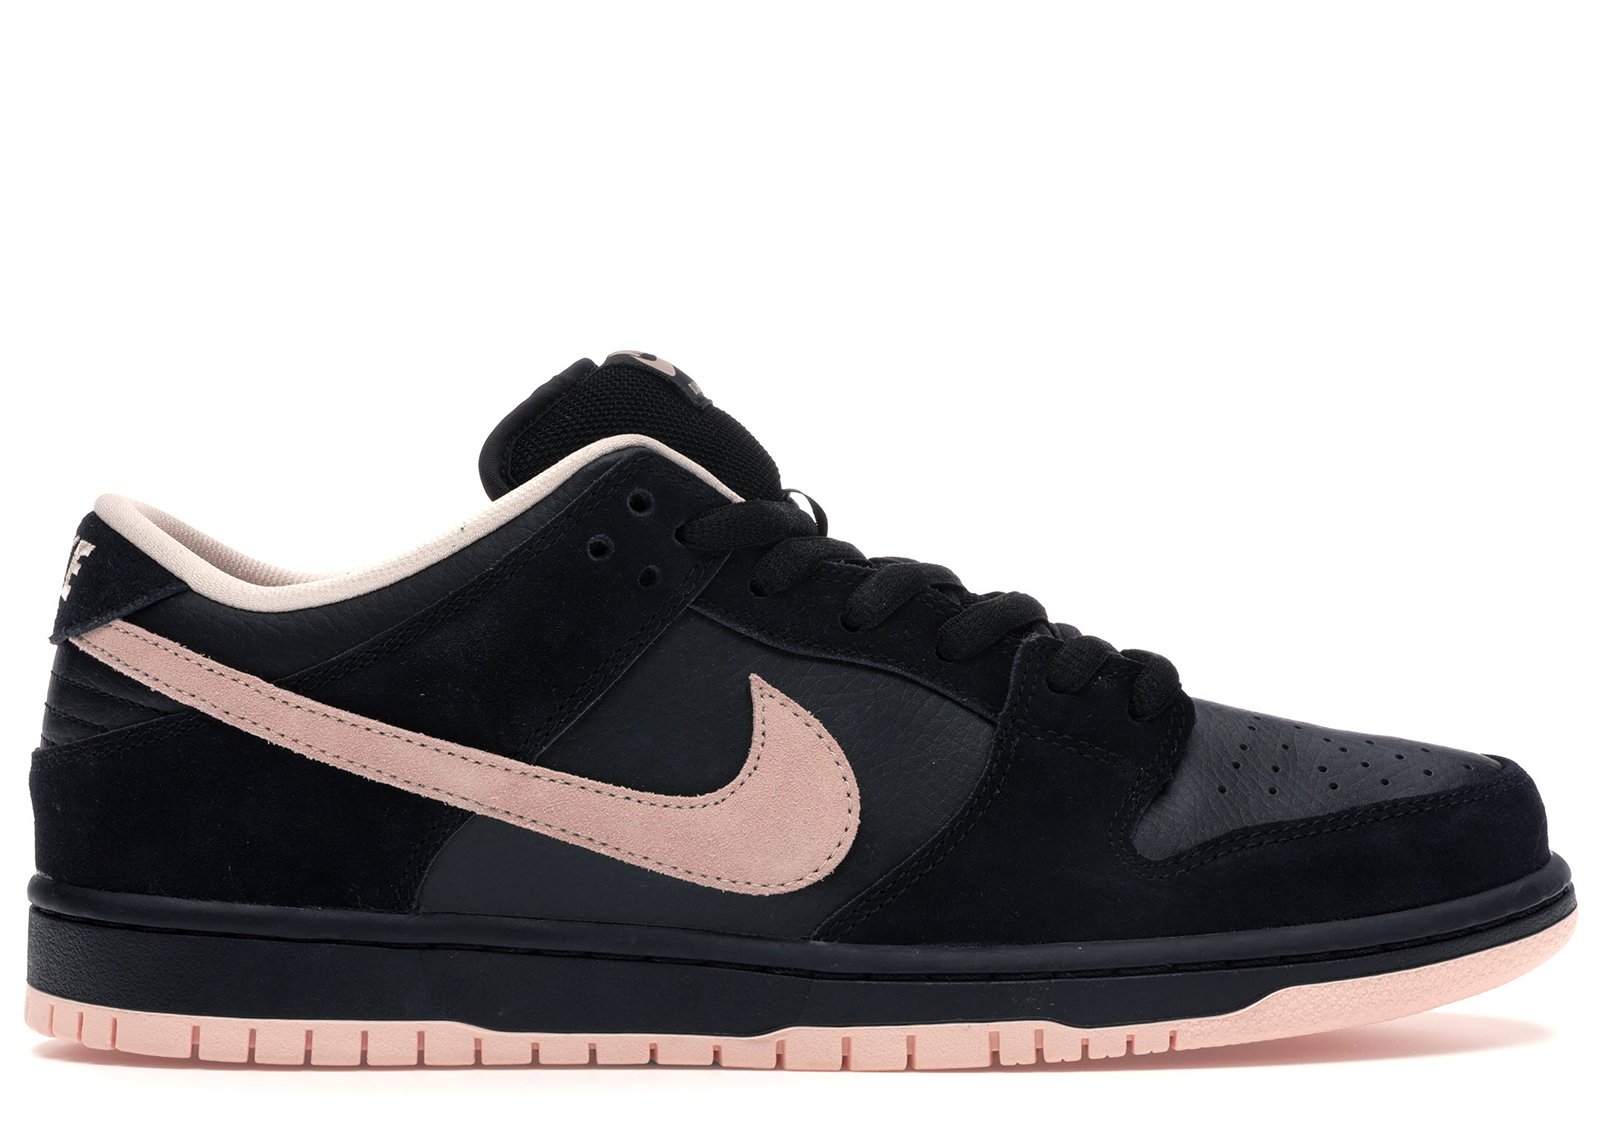 Nike SB Dunk Low Black Washed Coral sneakers